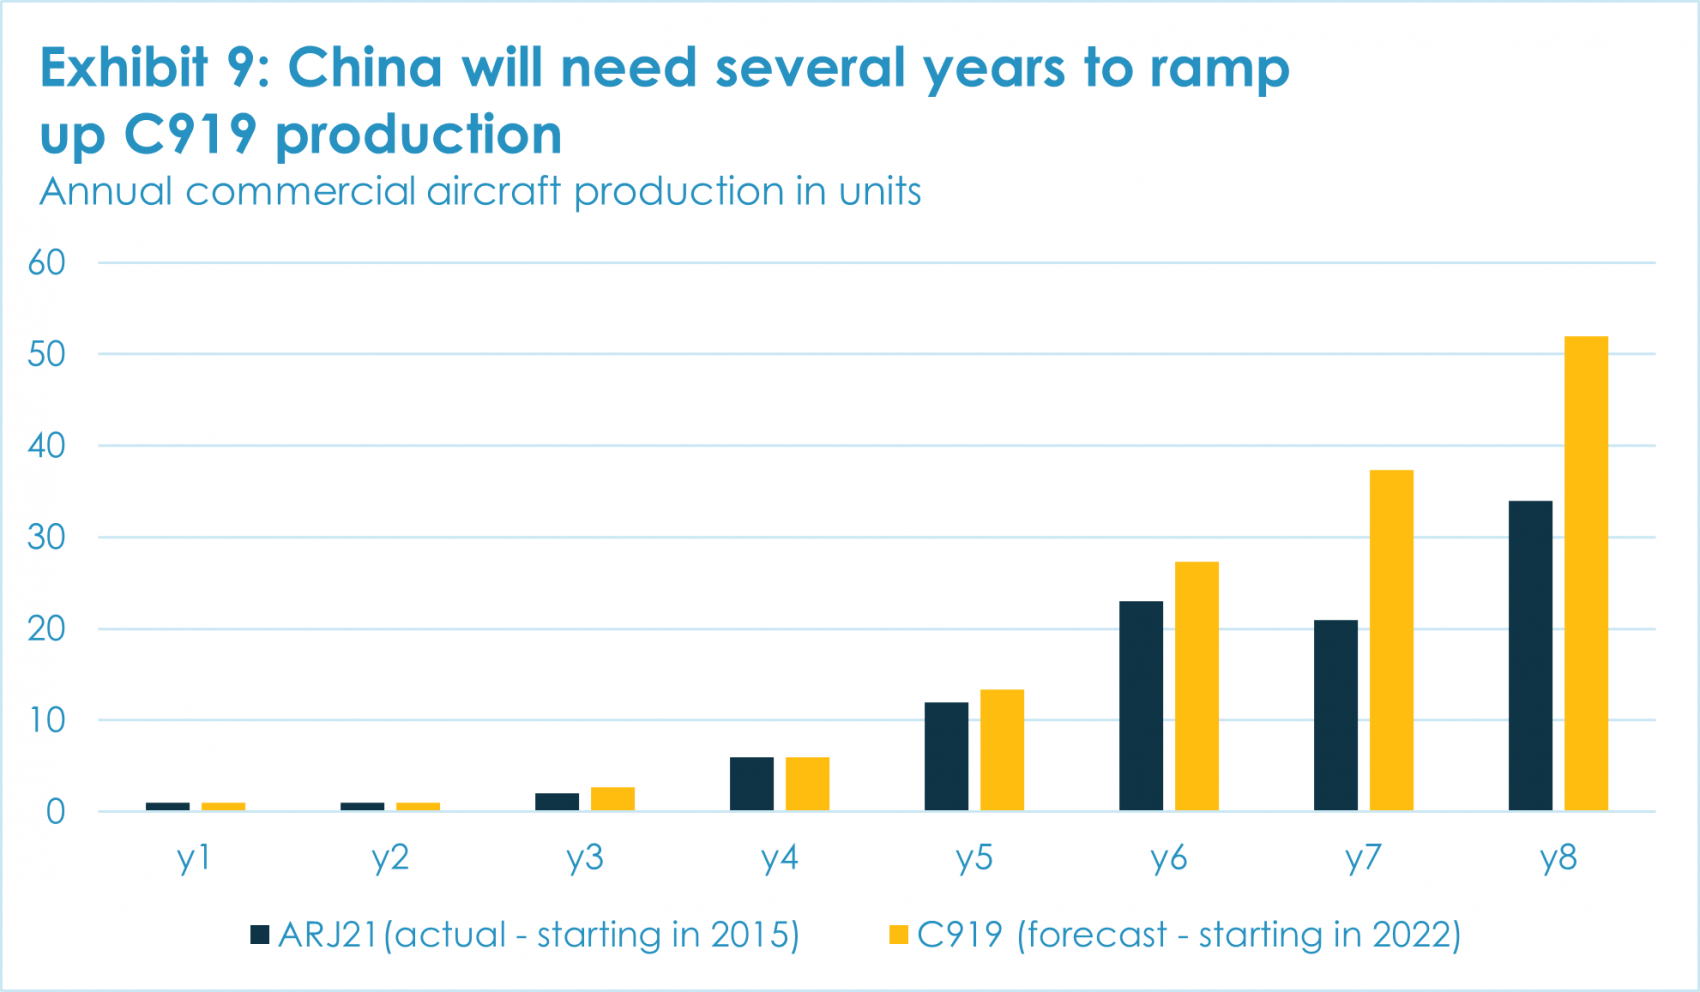 Exhibit 9: China will need several years to ramp up C919 production